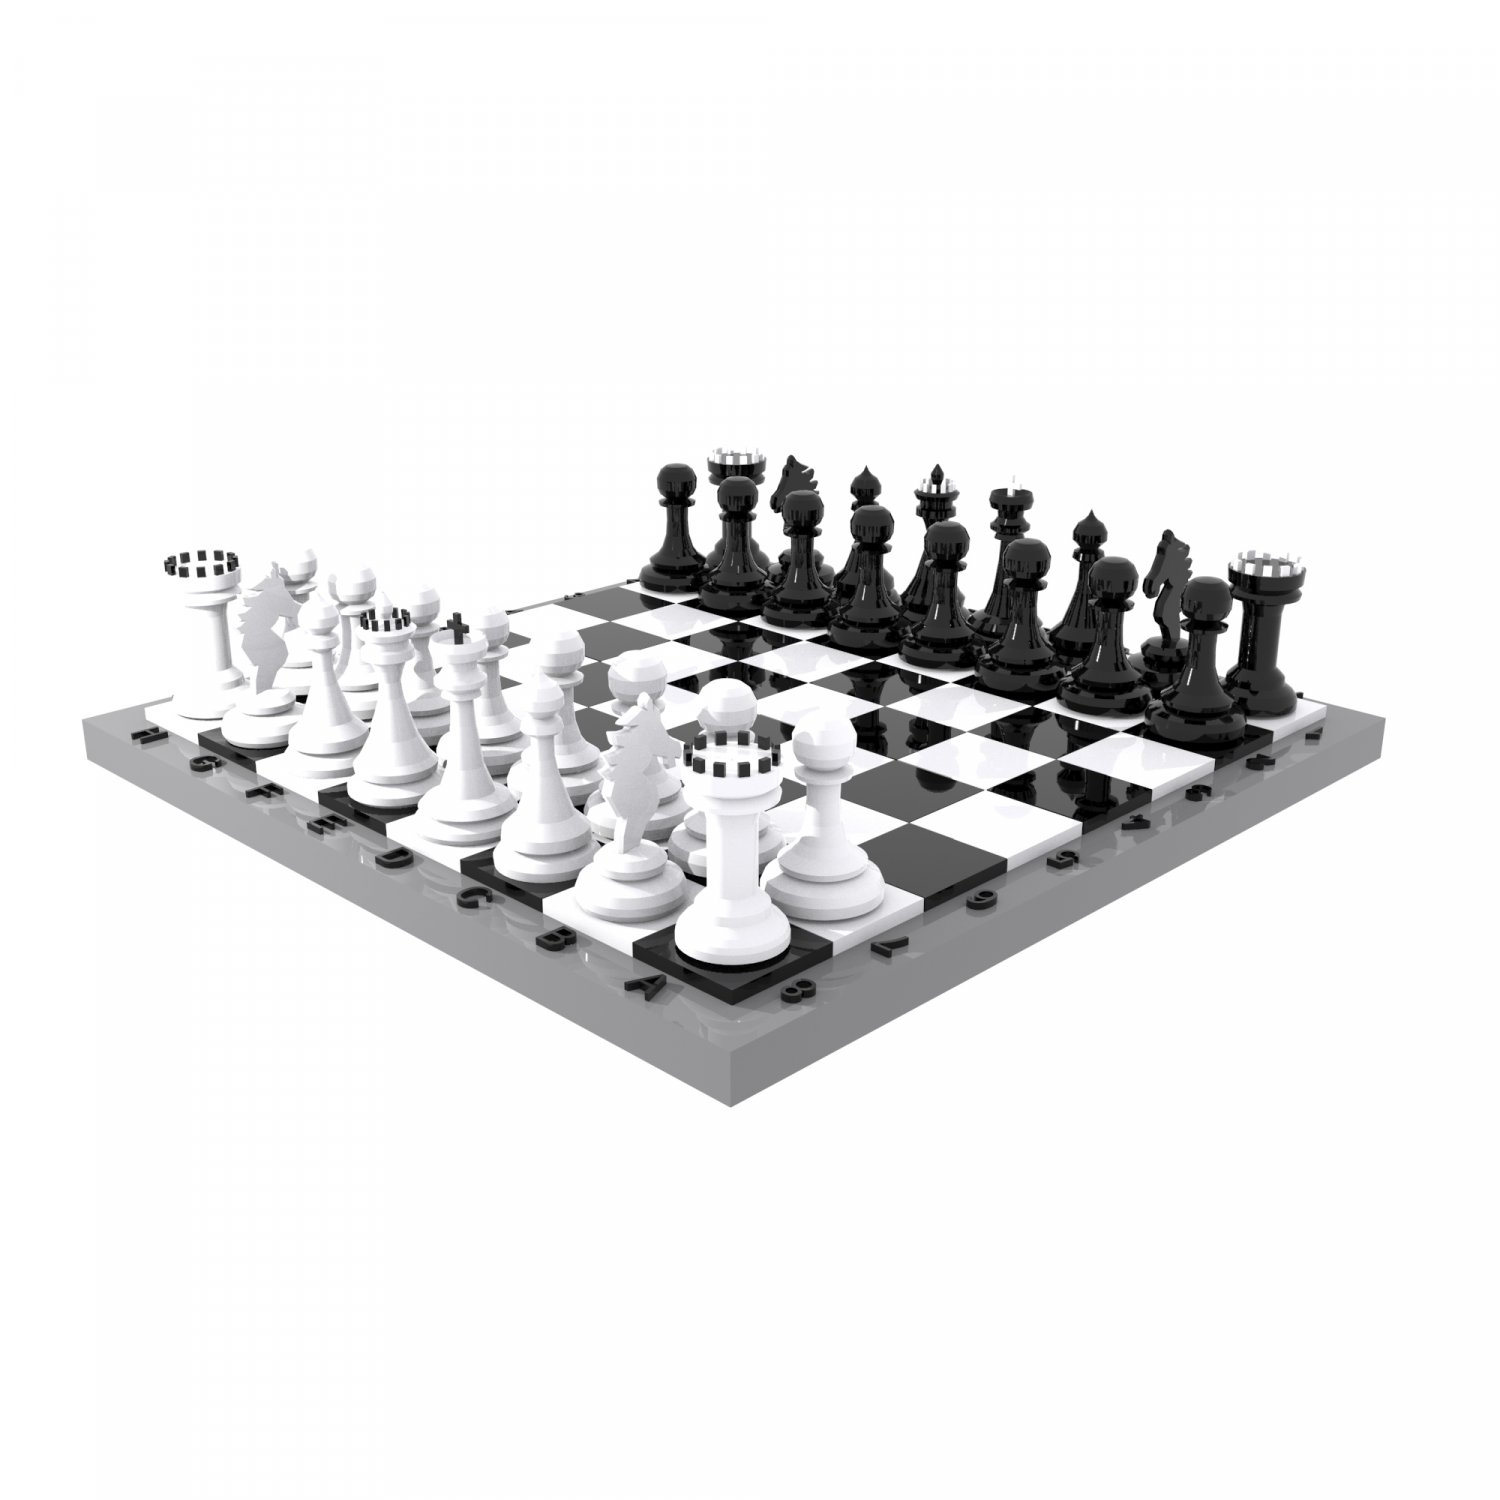 Simply Chess – Downloadable Game